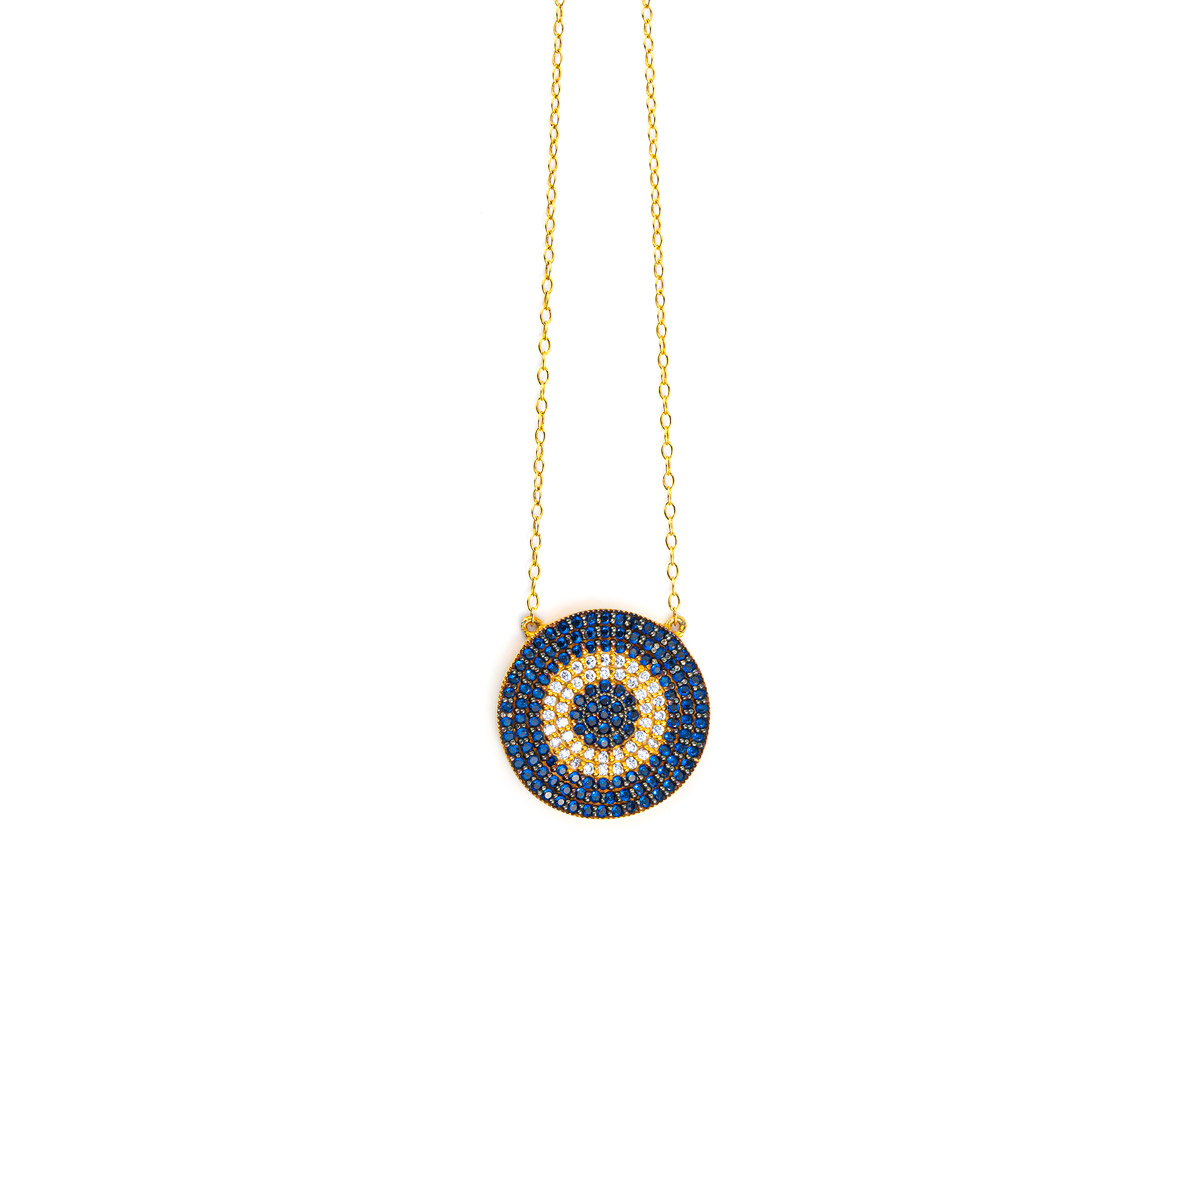 Evil Eye Necklace with Zircon - 925 Silver and Gold Plated